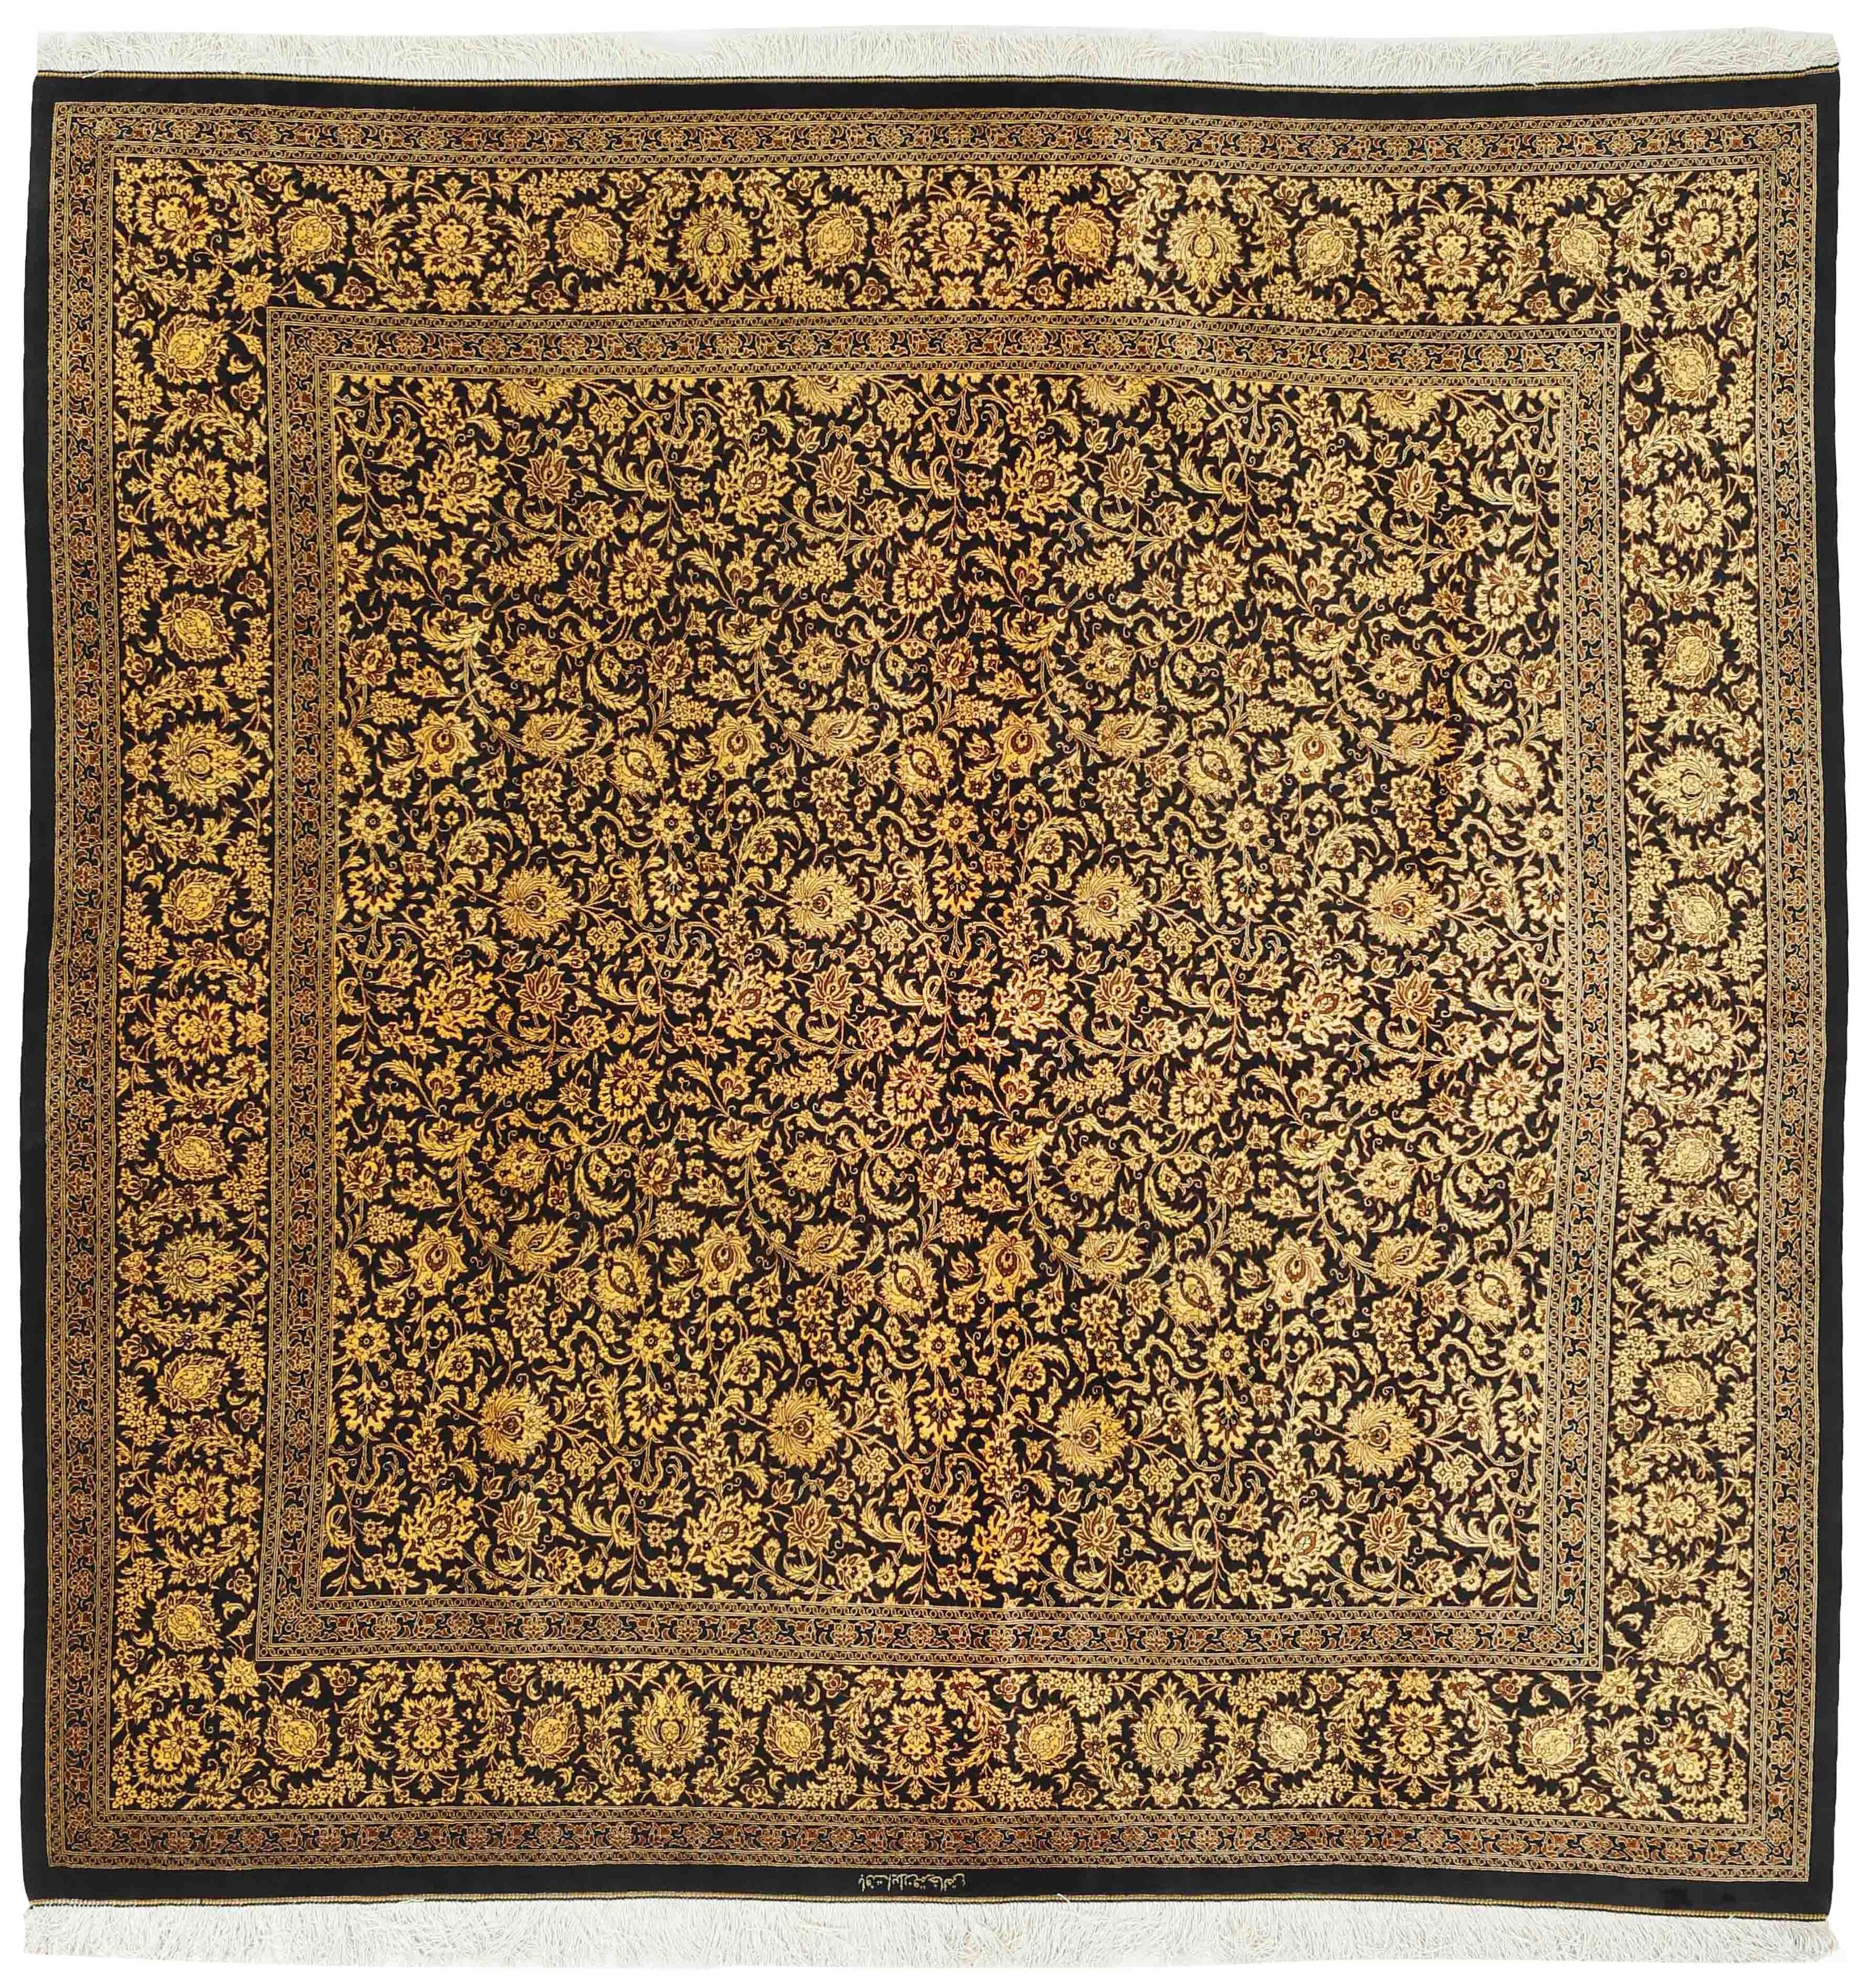 Authentic persian square rug with a traditional floral design in yellow